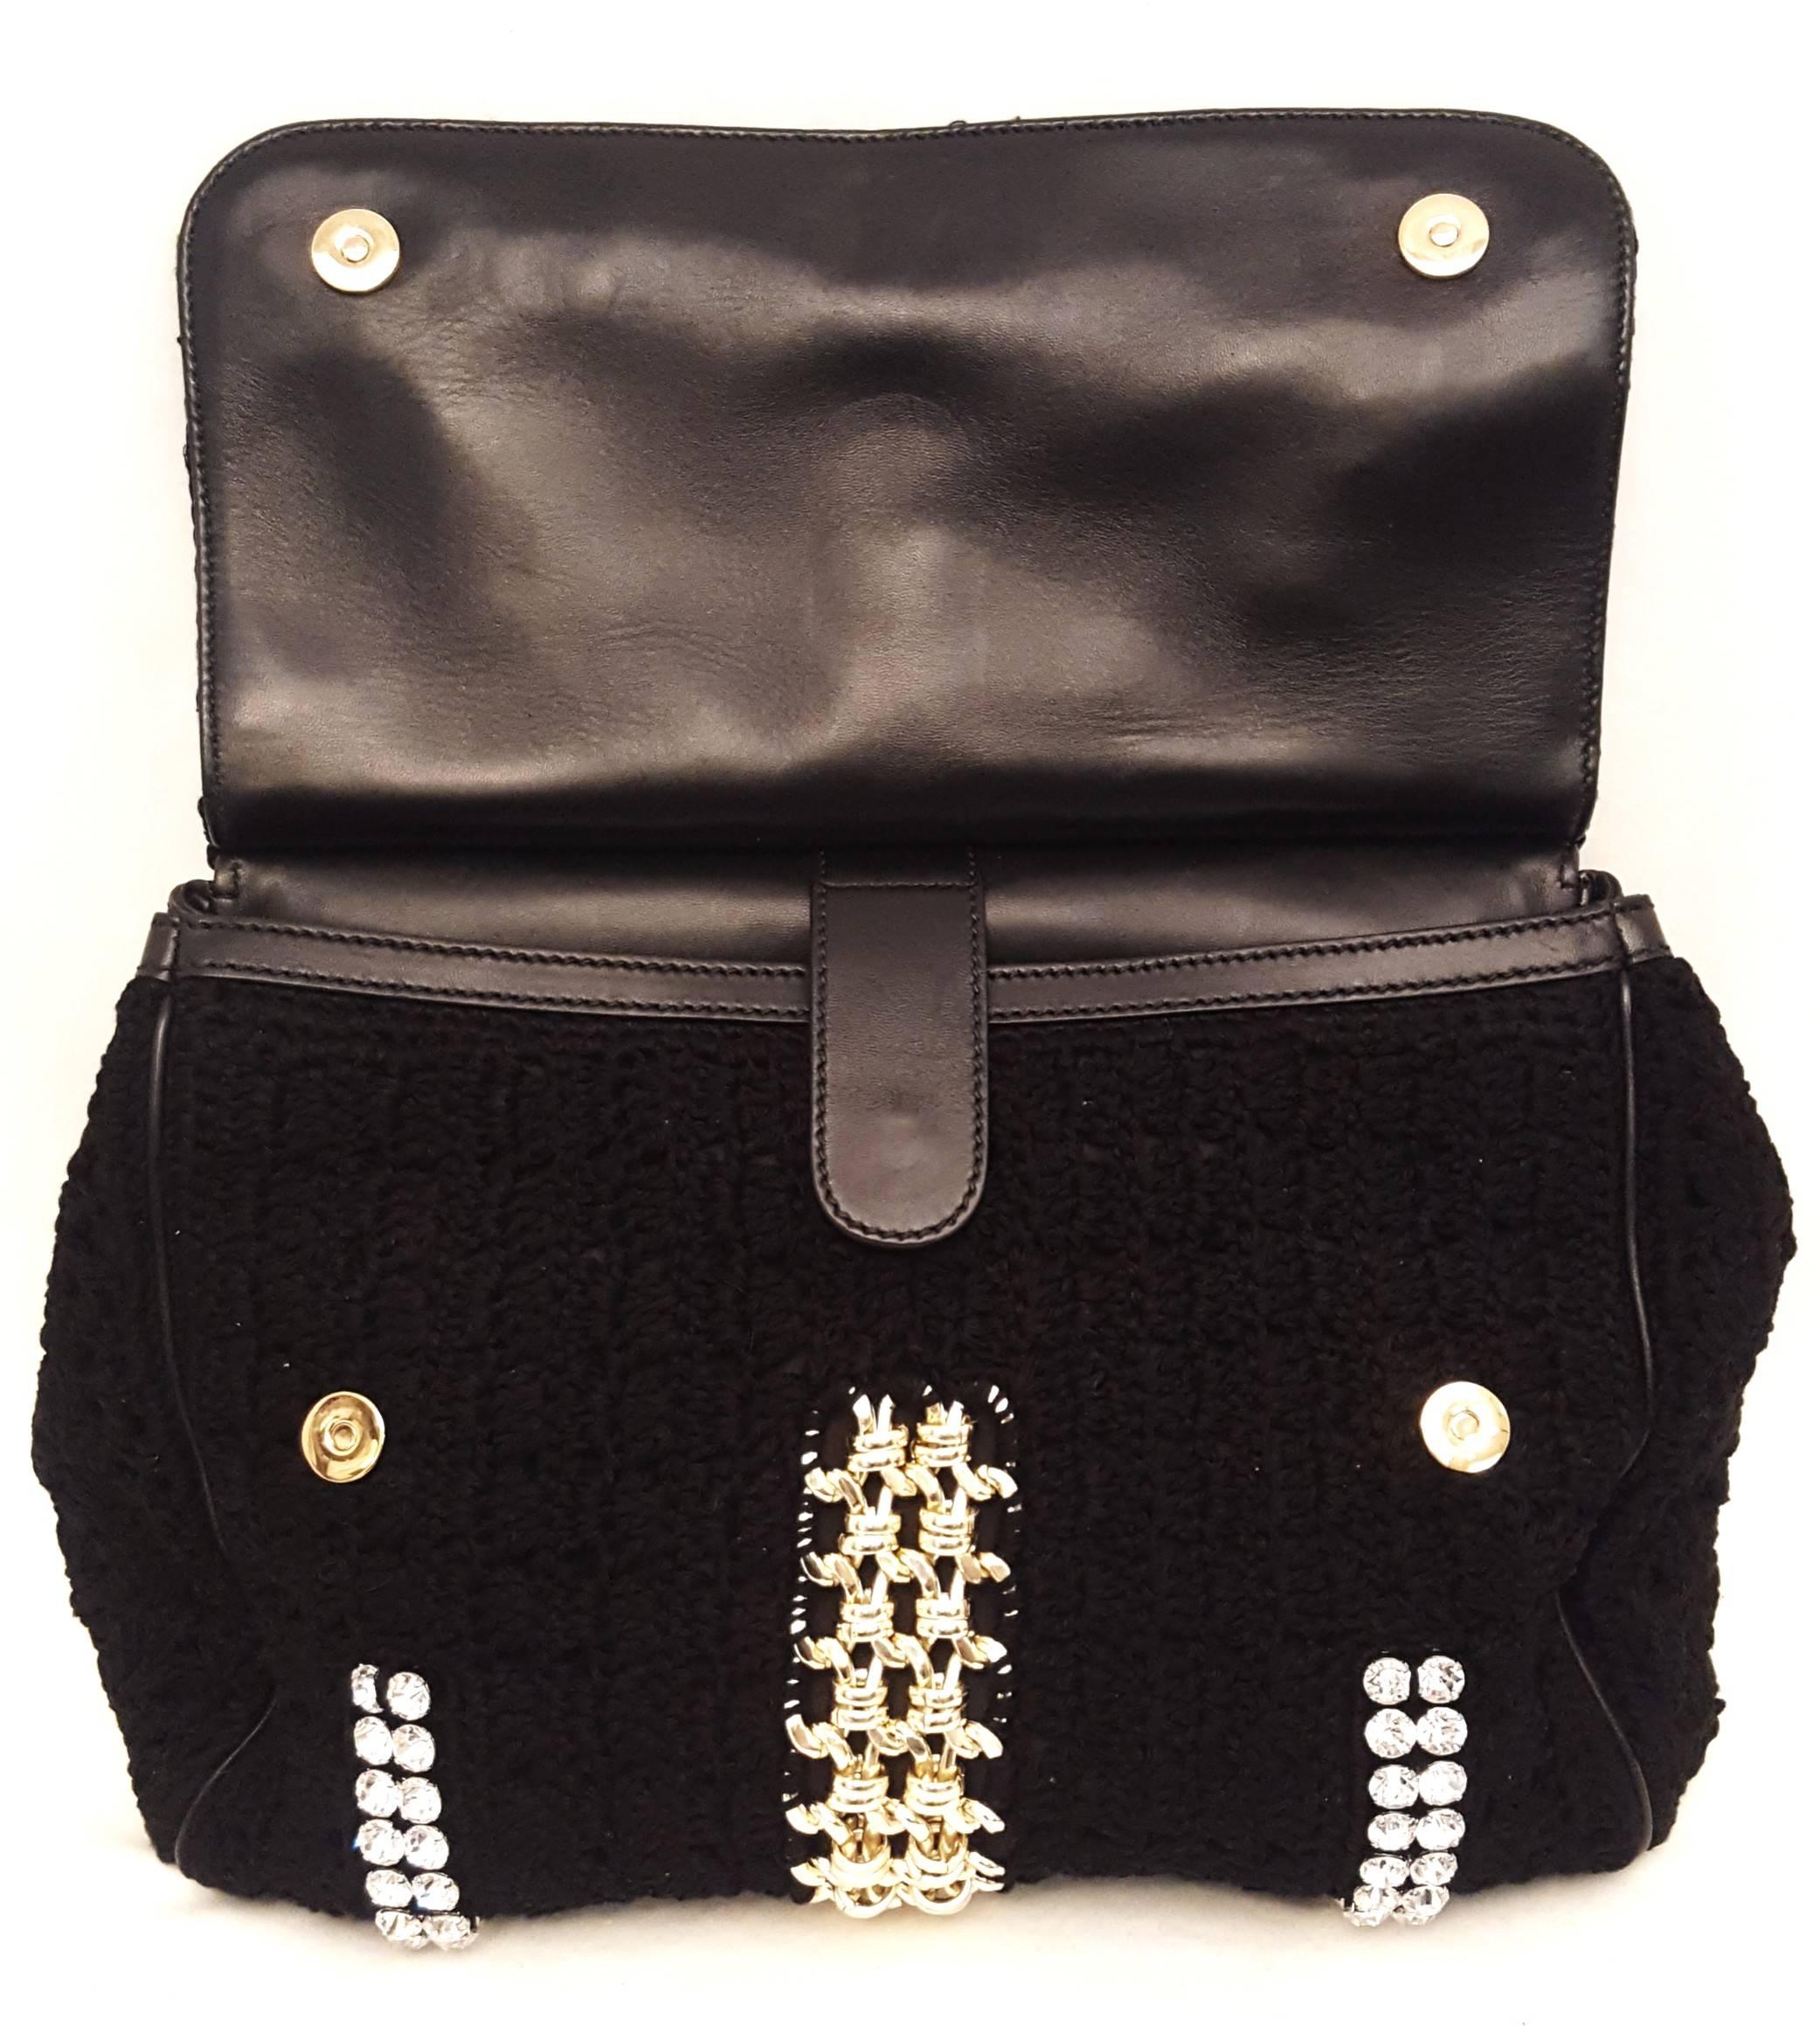 Dolce & Gabbana Black Crochet Crystal and Chain Decorated Top Handle Bag 3